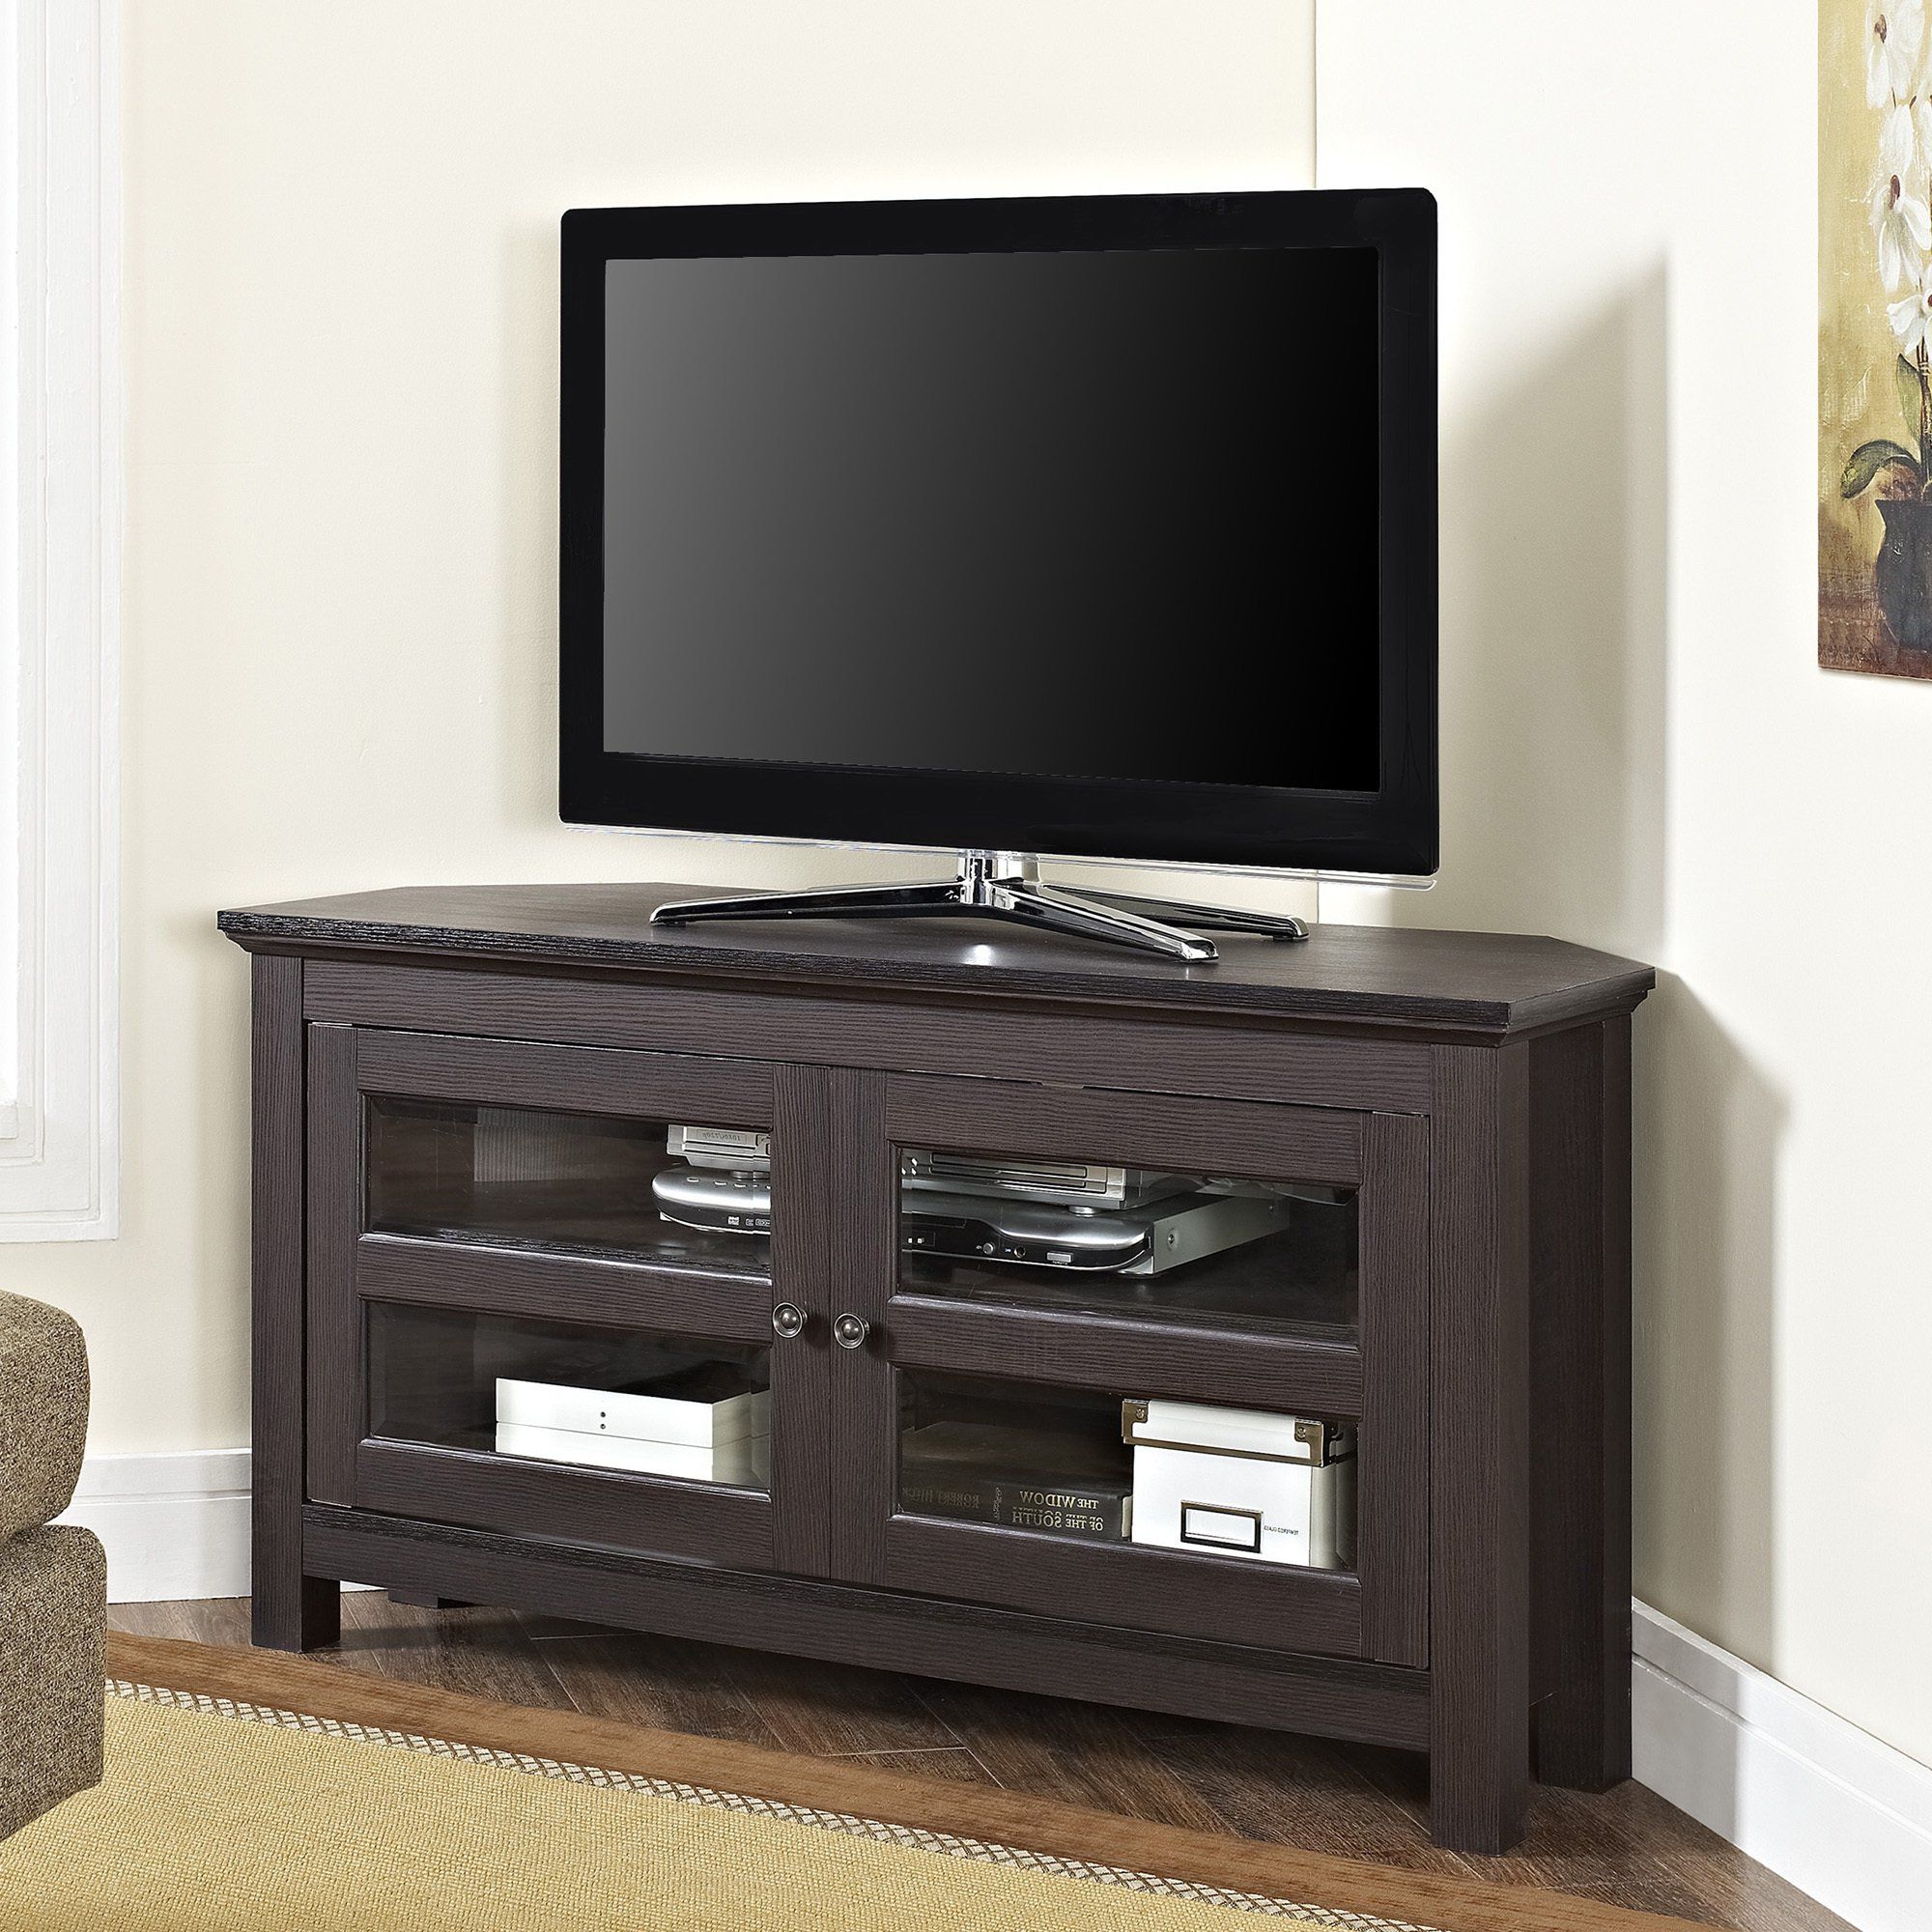 Latest Corner Tv Cabinets For Flat Screens With Doors Within Shop Espresso Wood 44 Inch Corner Tv Stand – Free Shipping On Orders (View 17 of 20)